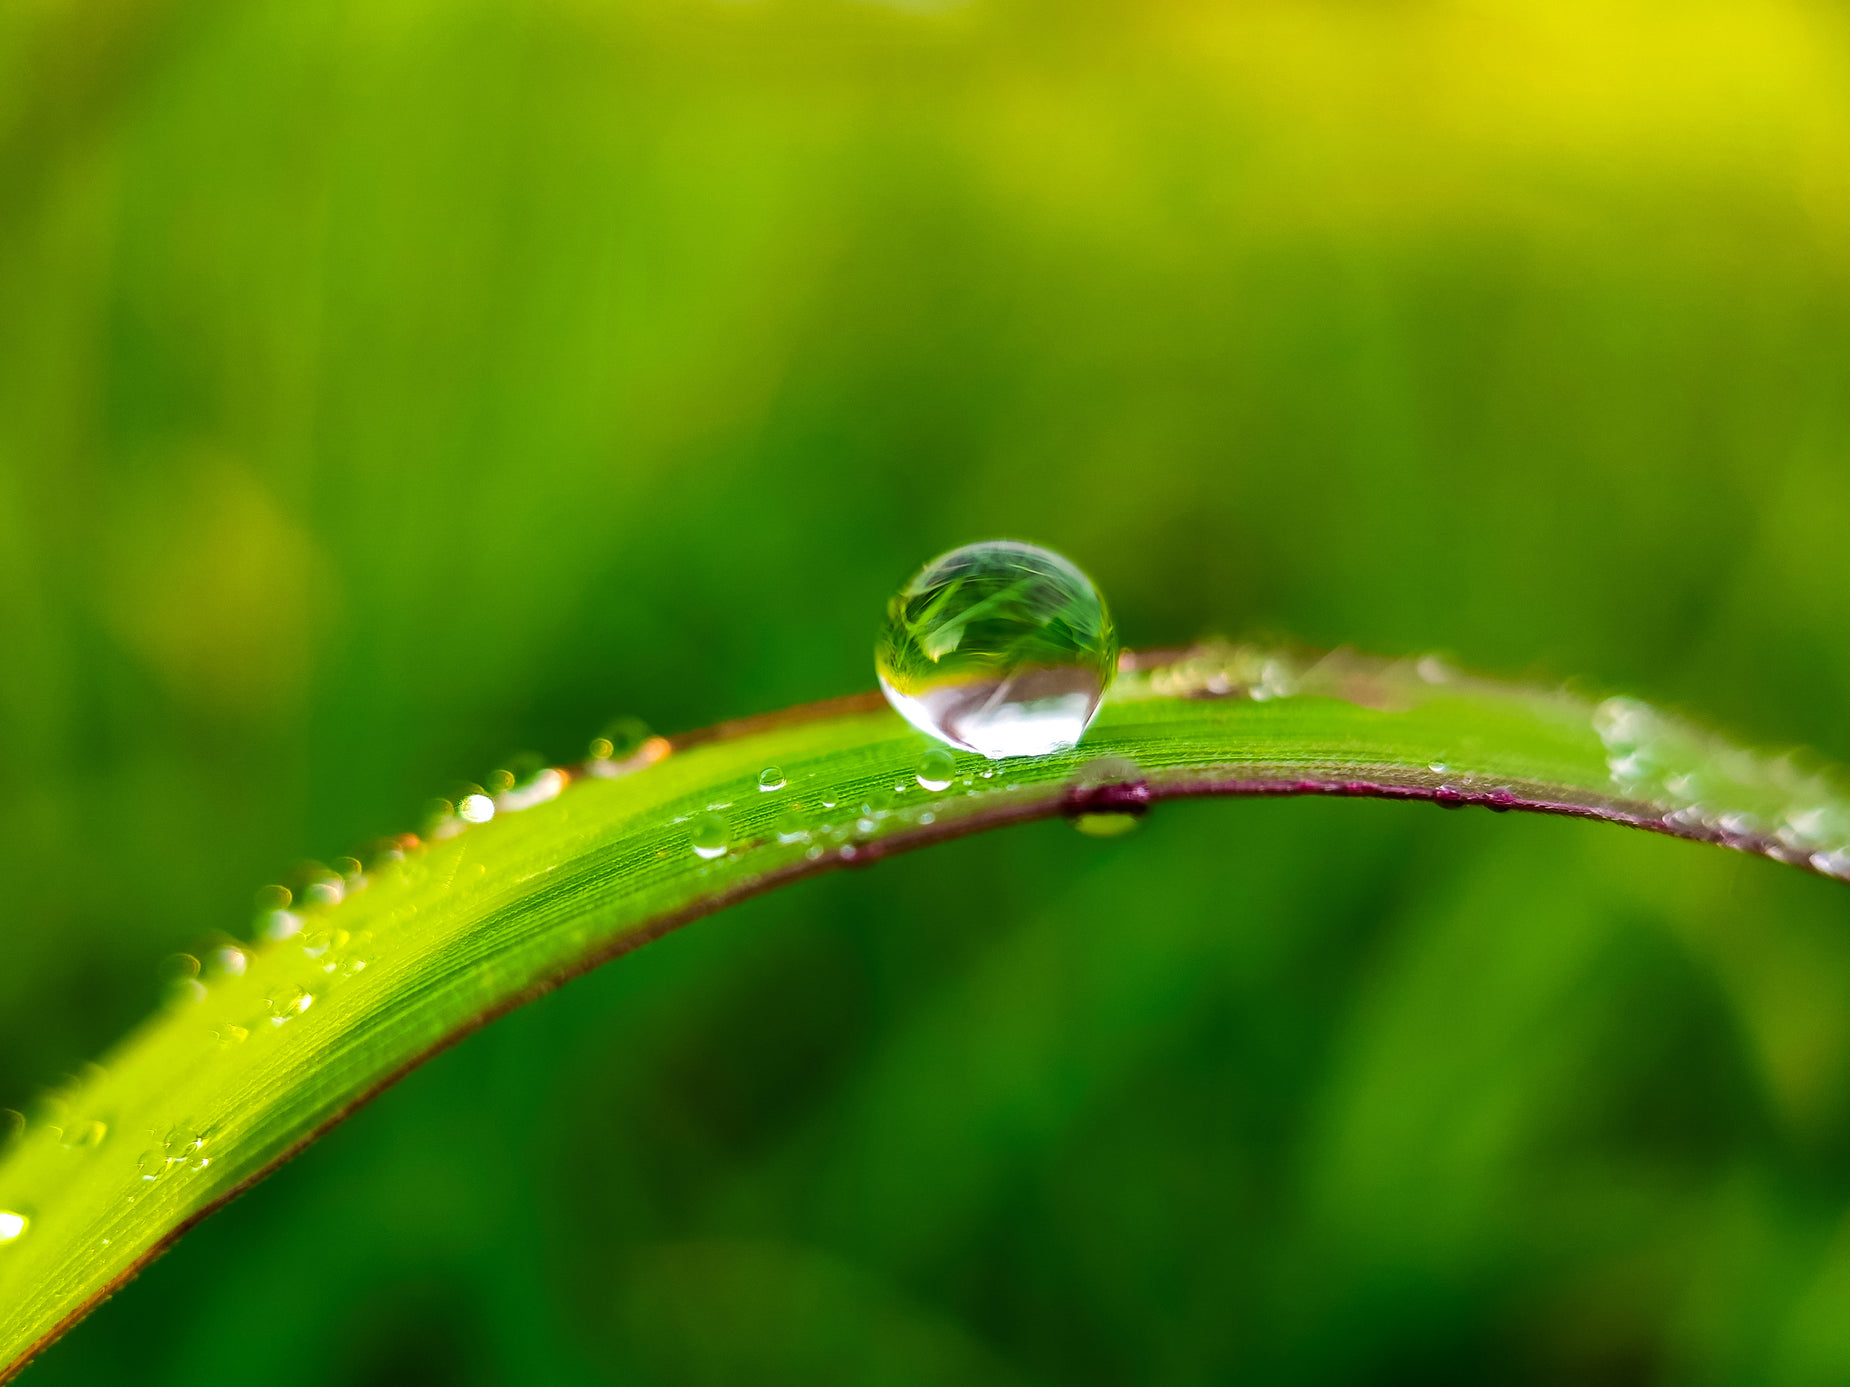 a close up view of a water drop on a green leaf